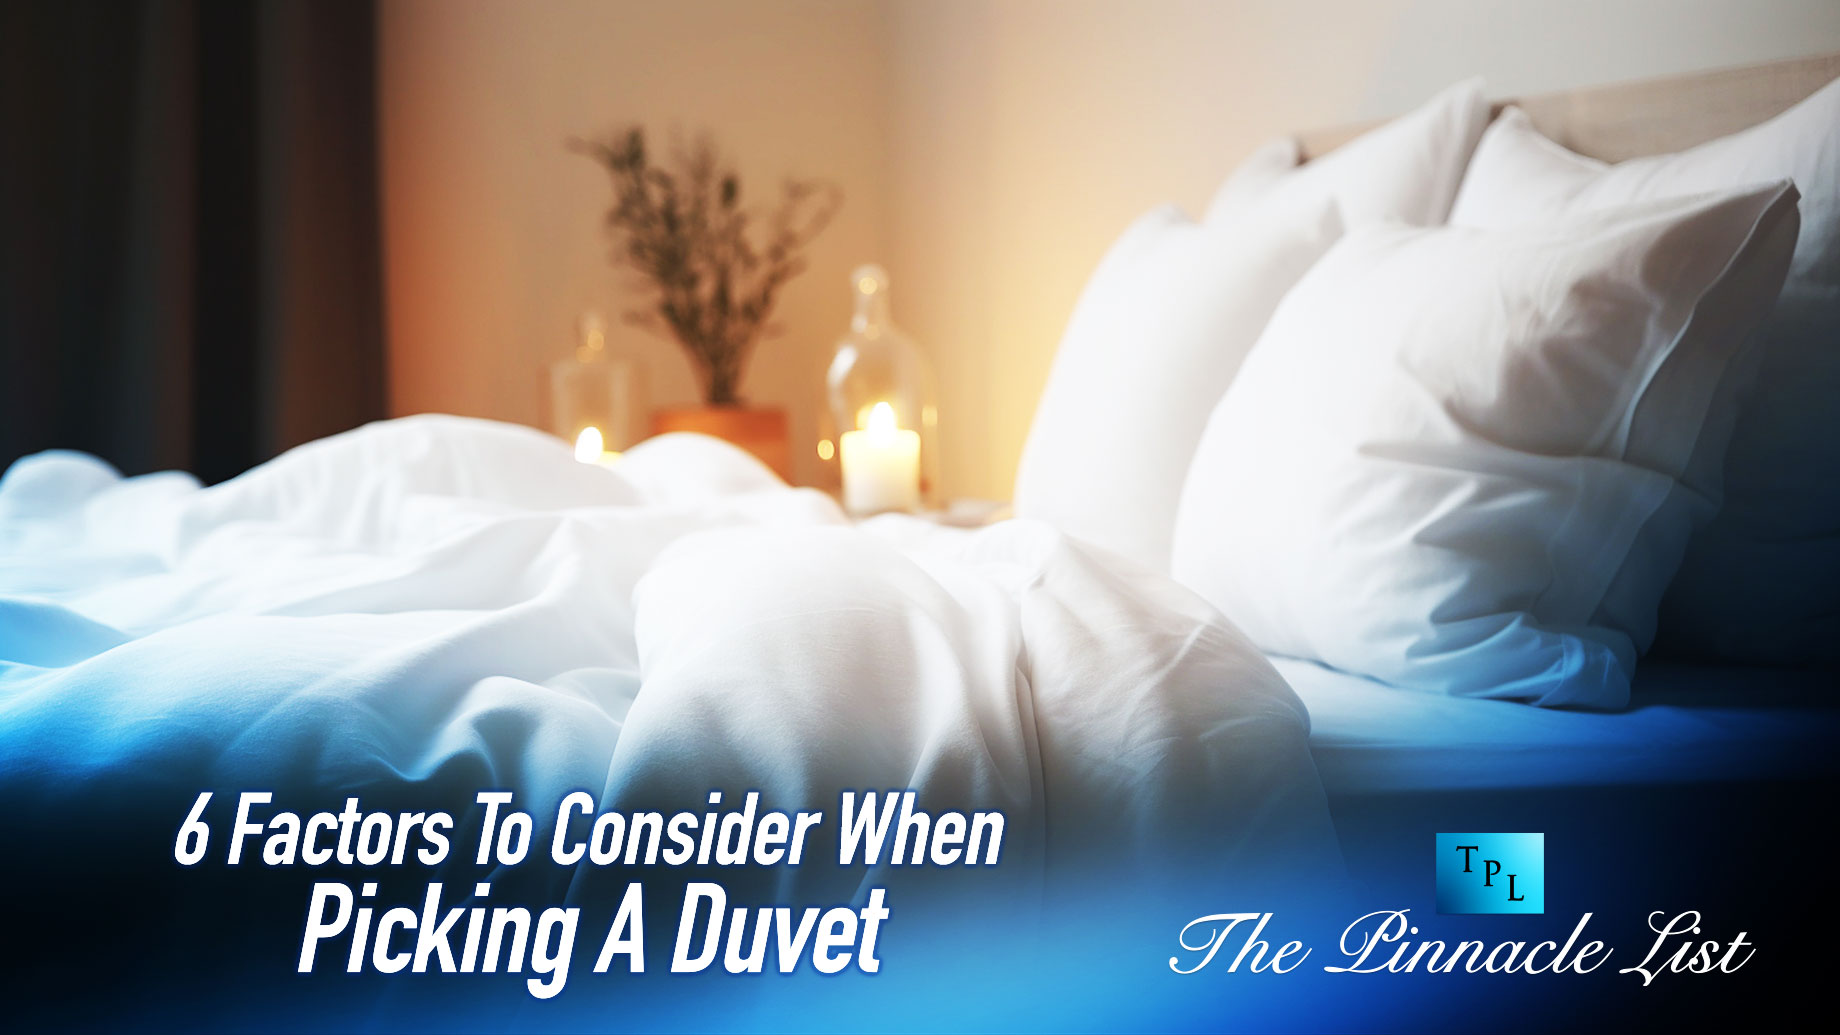 6 Factors To Consider When Picking A Duvet